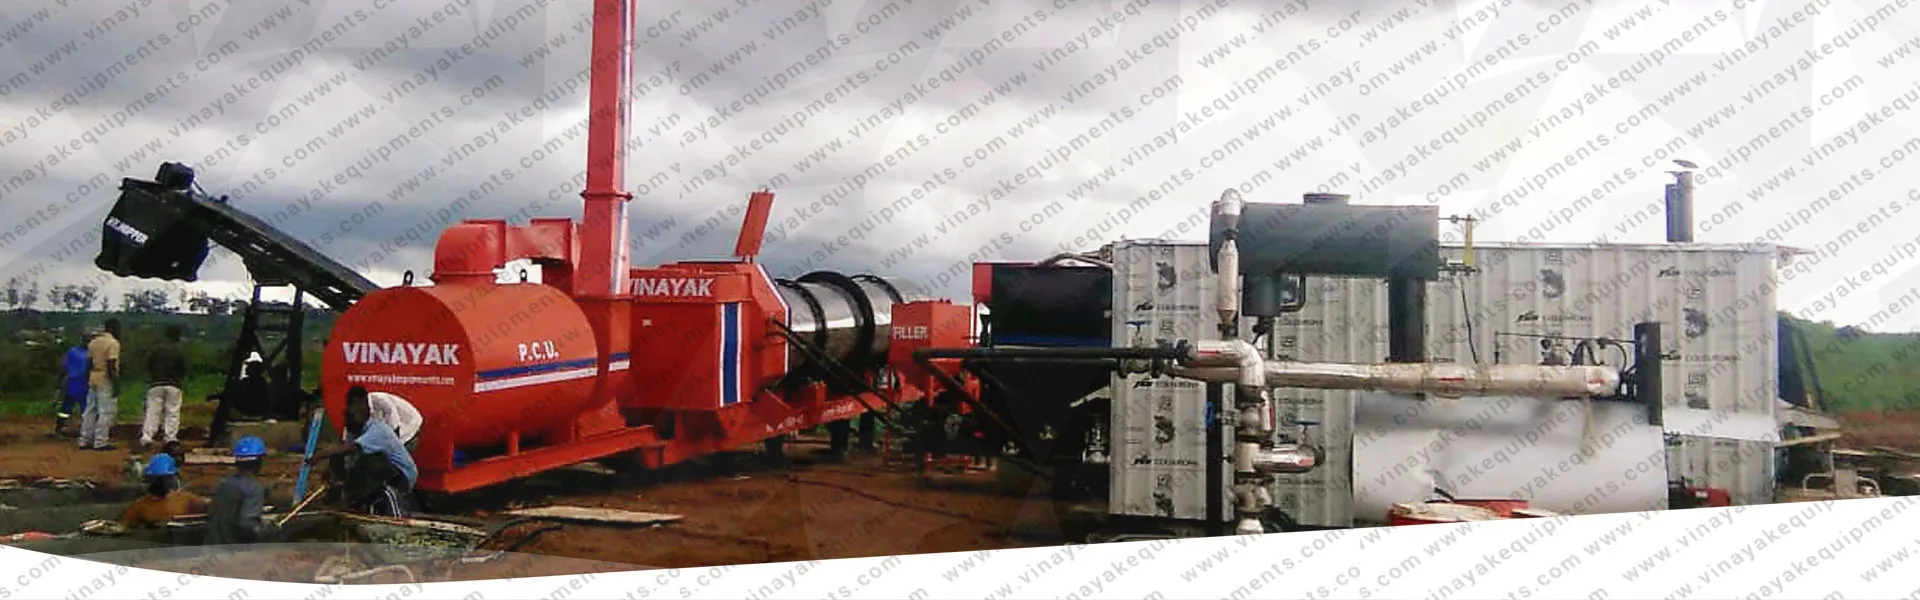 Asphalt Drum Mixing Plant Exporters from India
